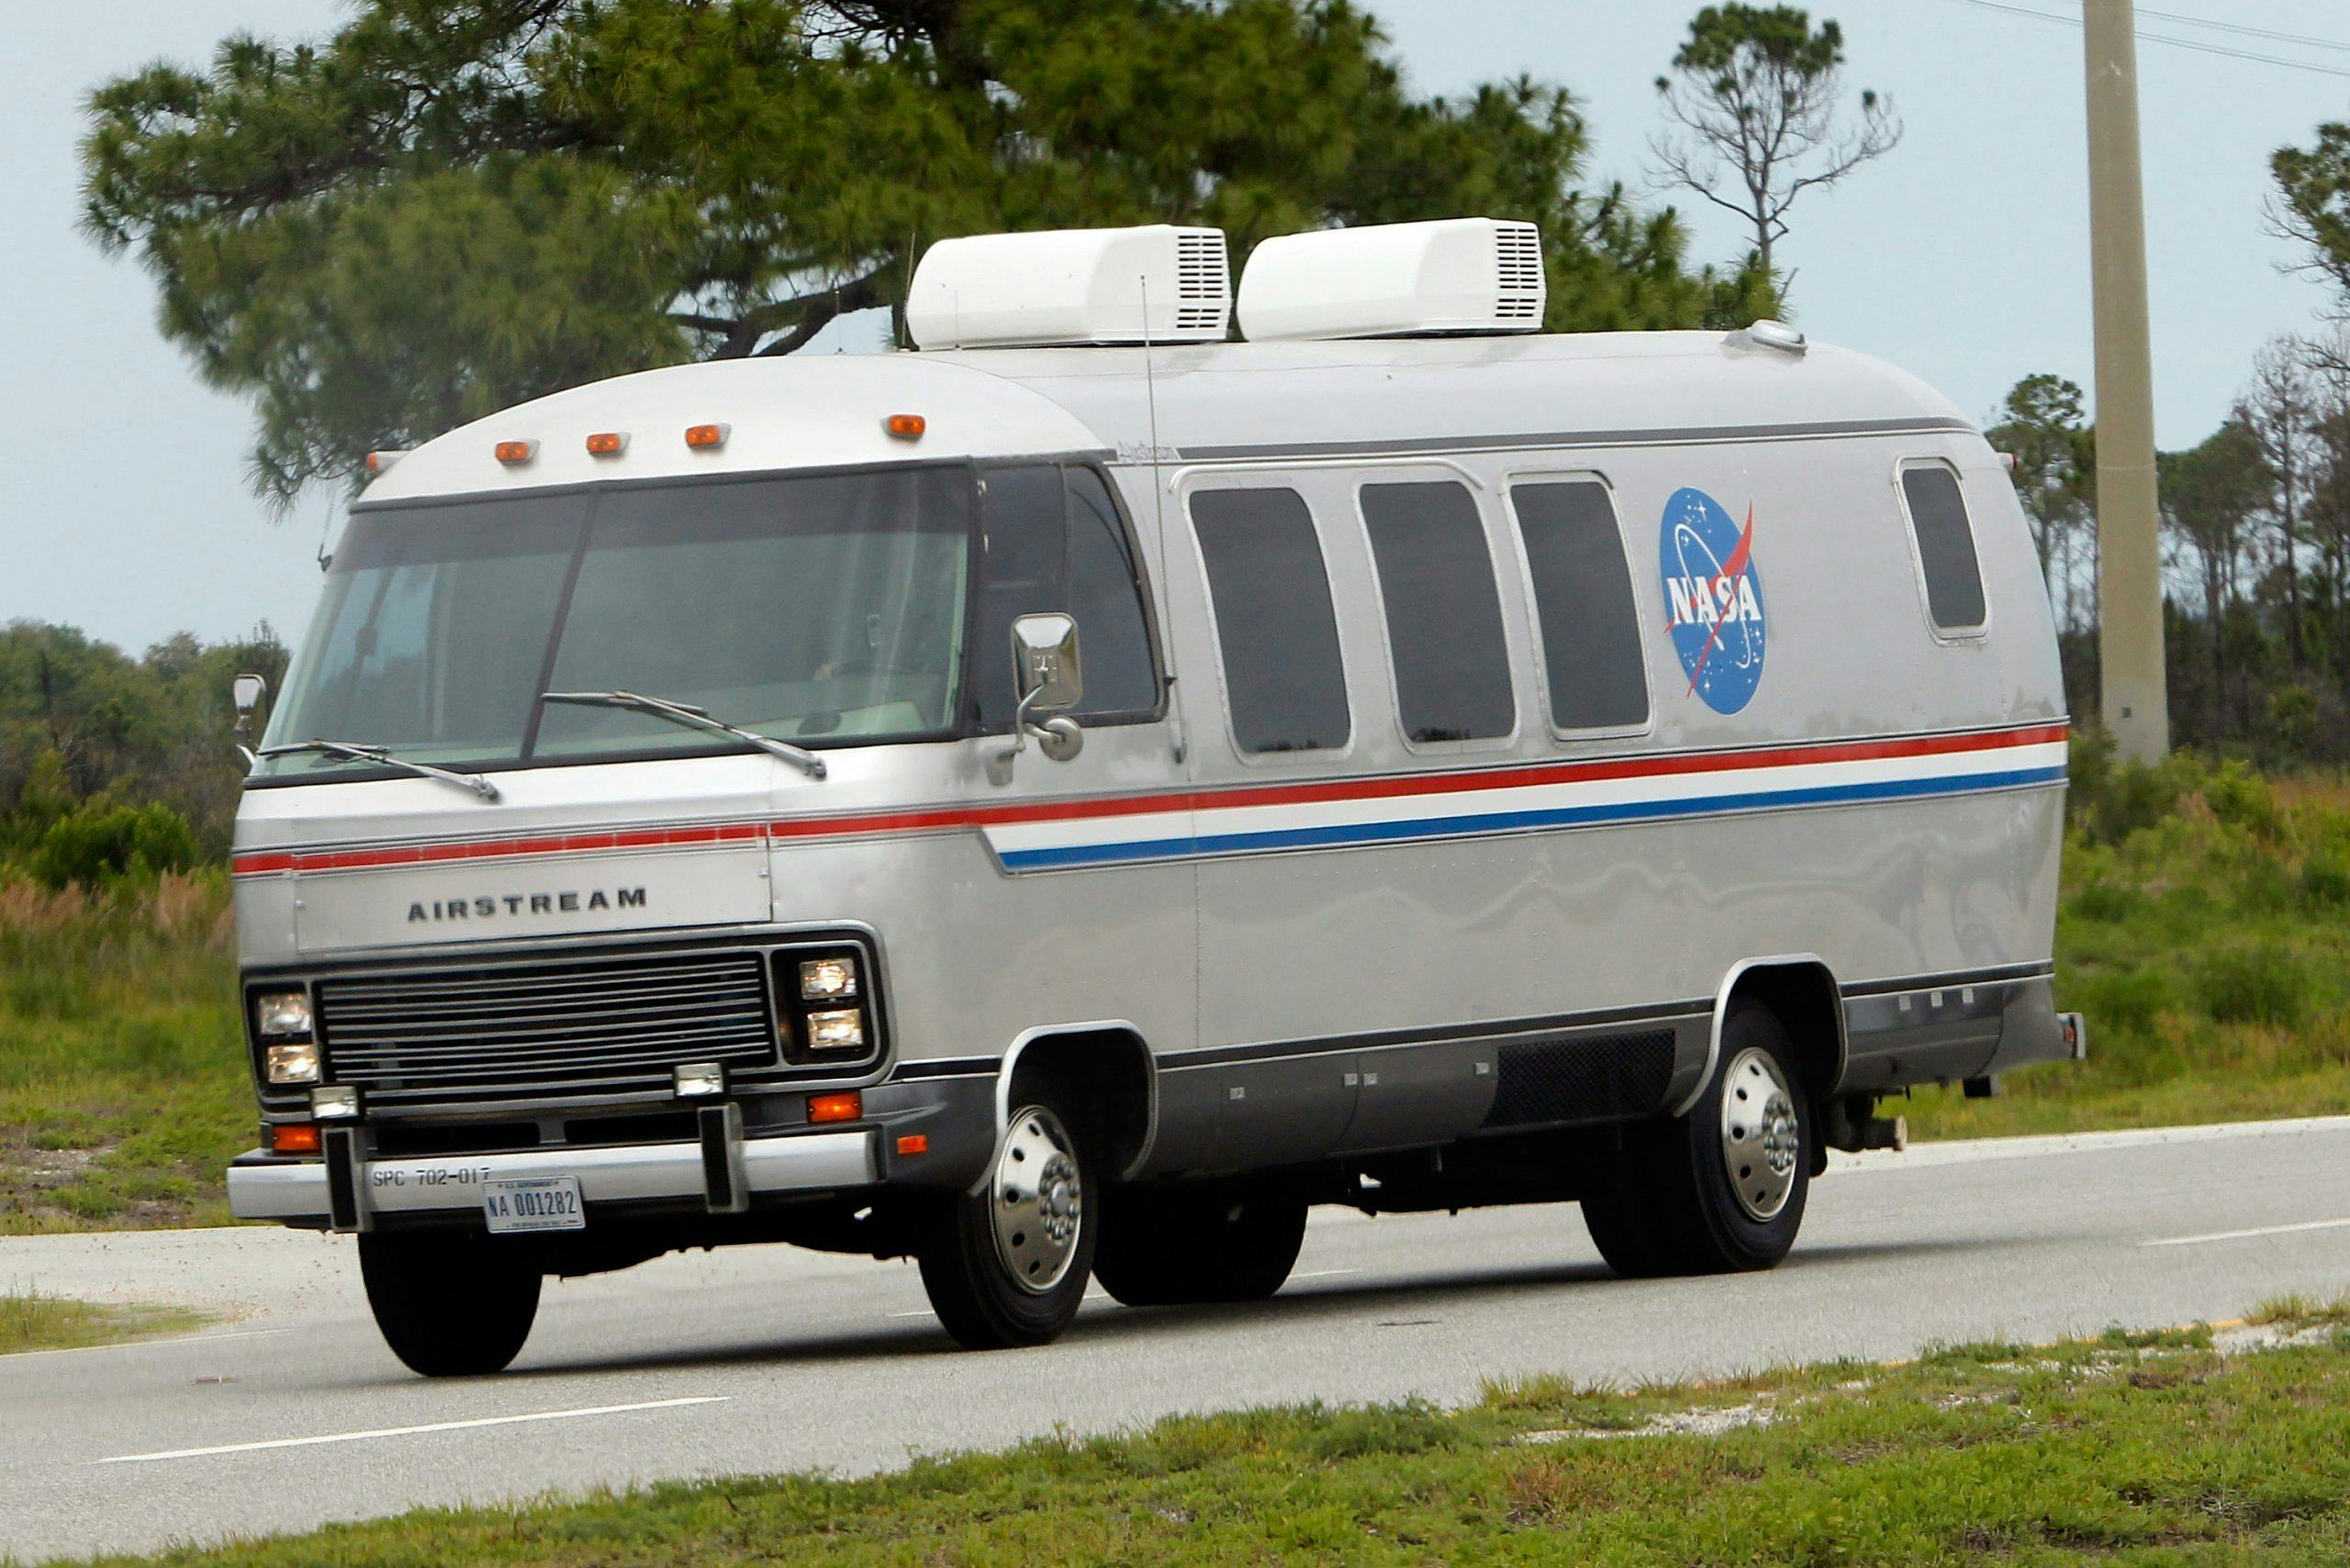 Space Shuttle Discovery astronauts ride in the astrovan